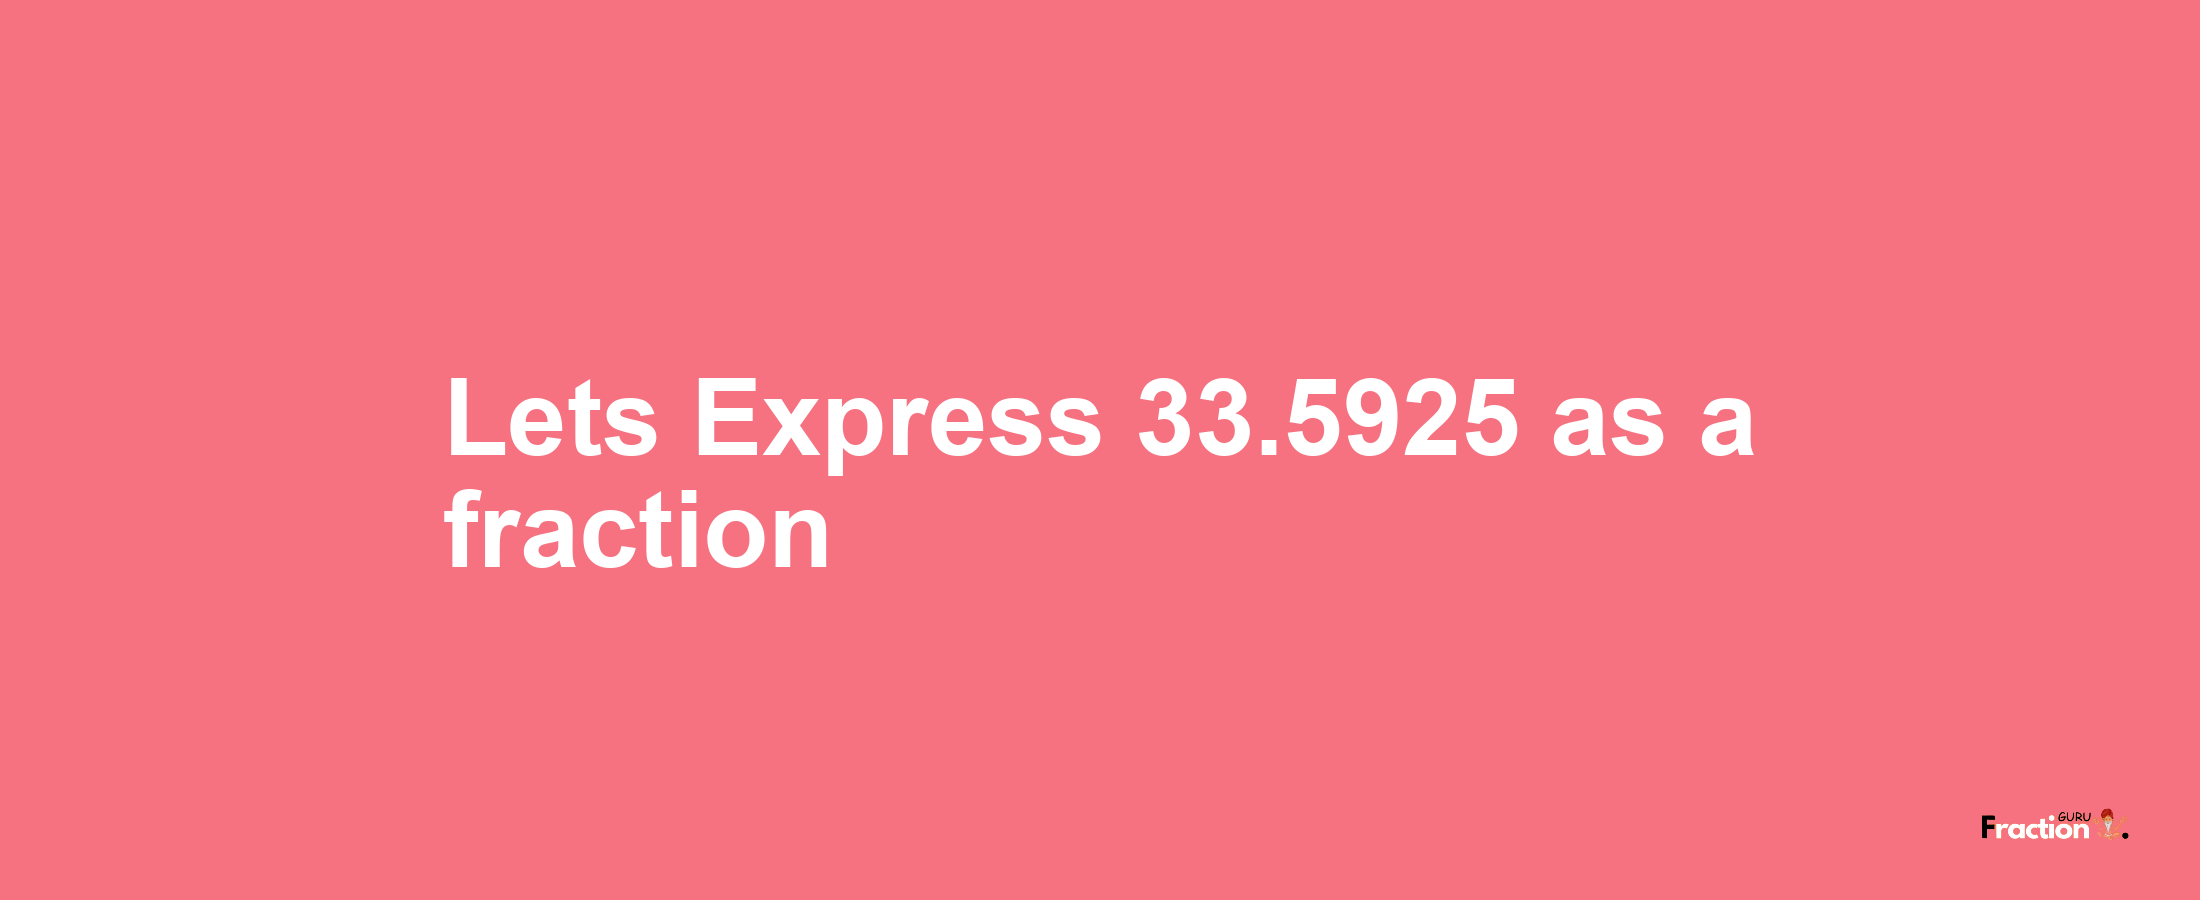 Lets Express 33.5925 as afraction